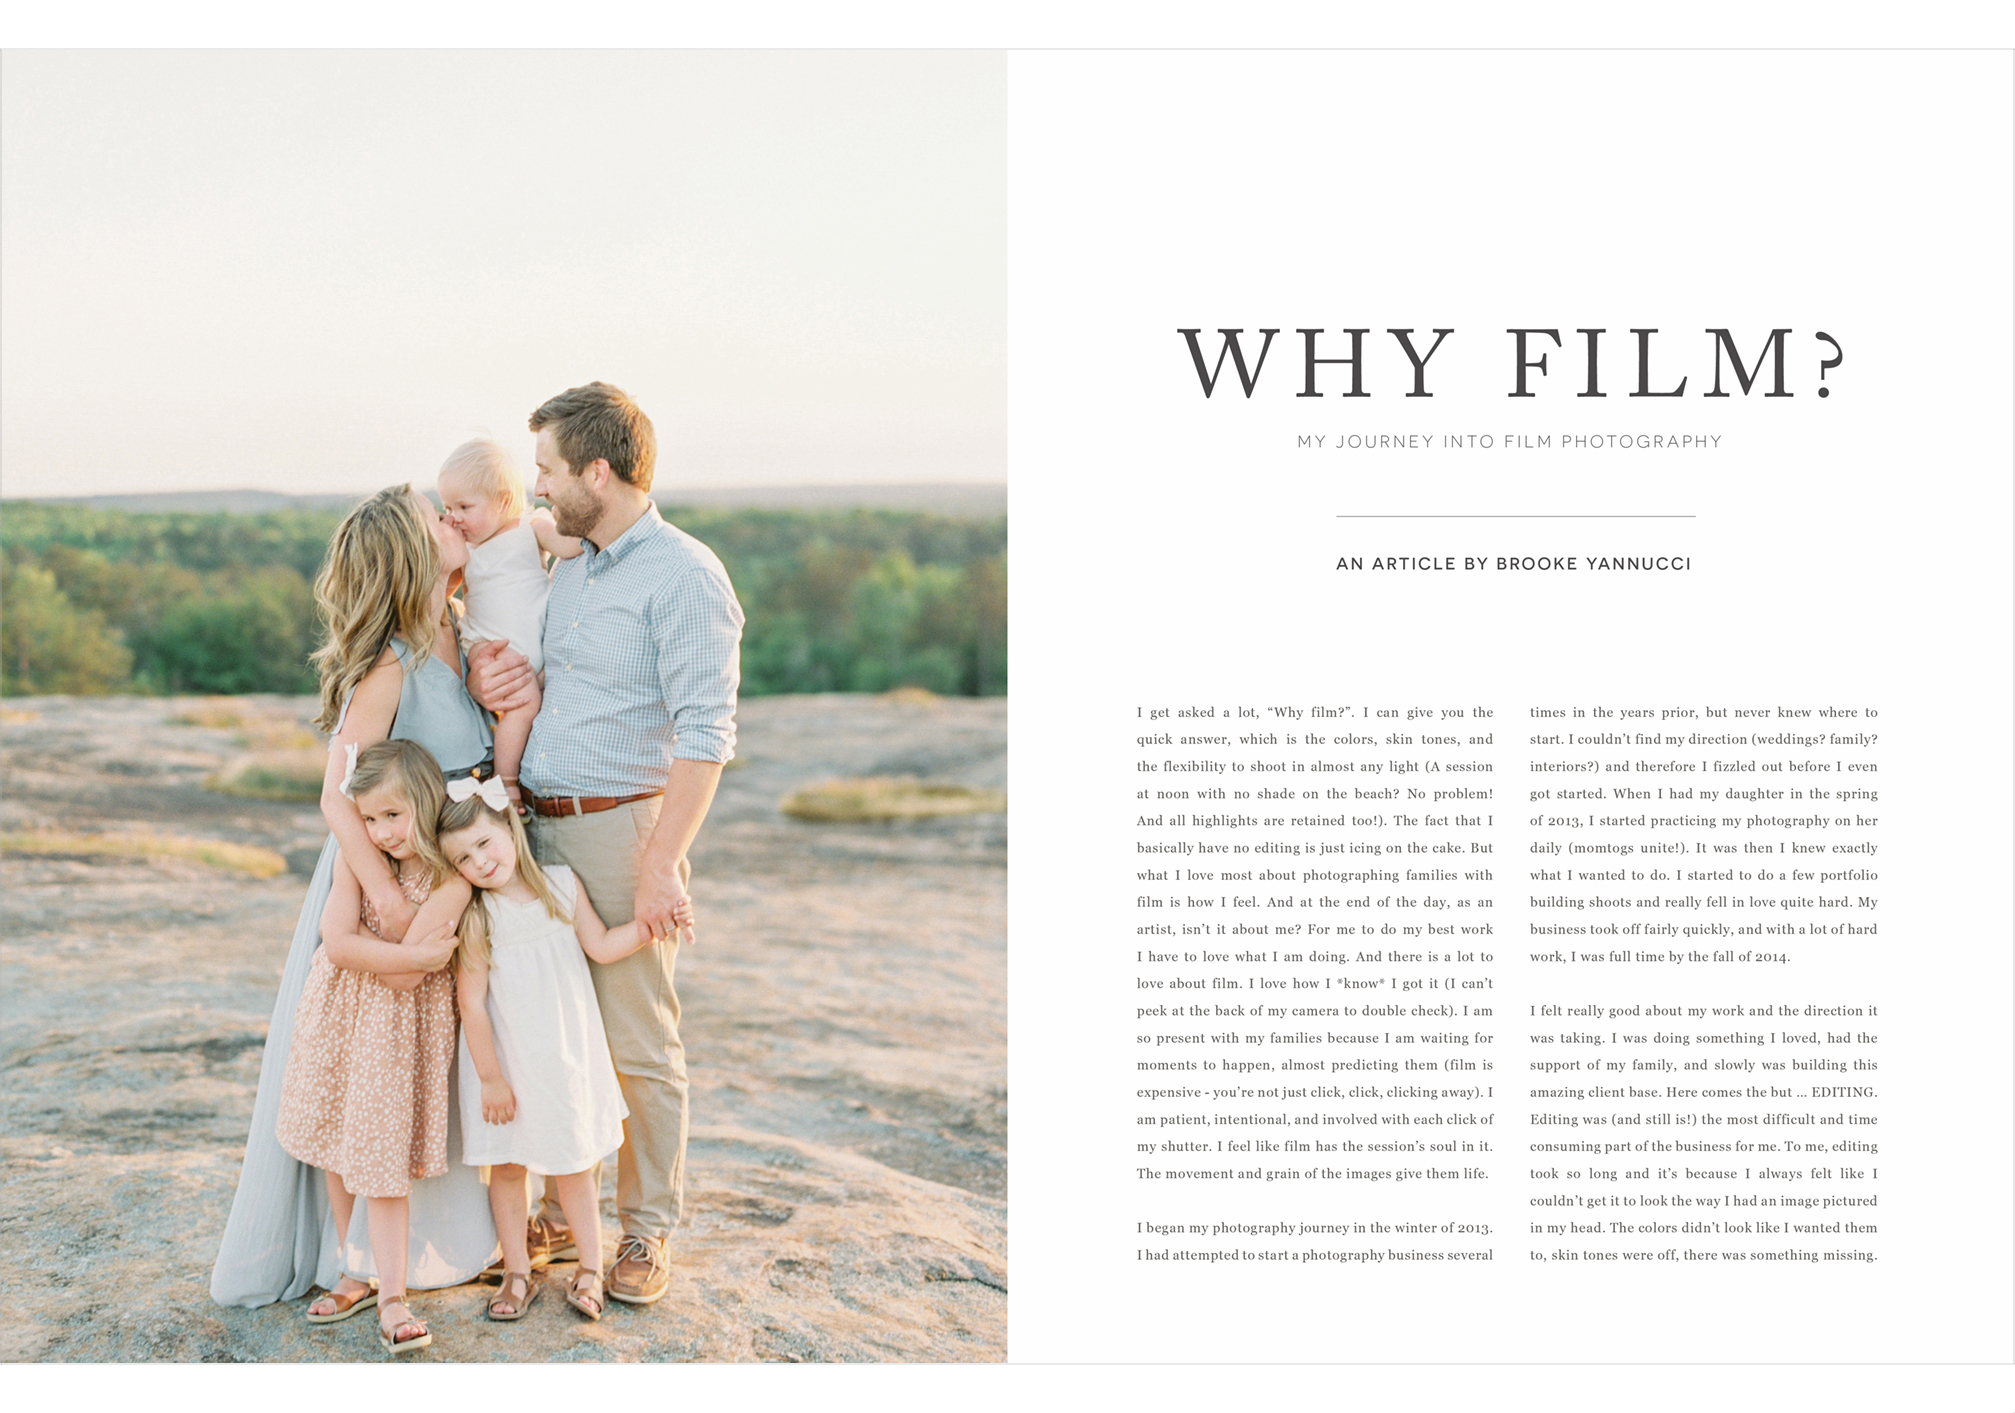 Why Film? My Journey into Film Photography, an article by Brooke Yannucci